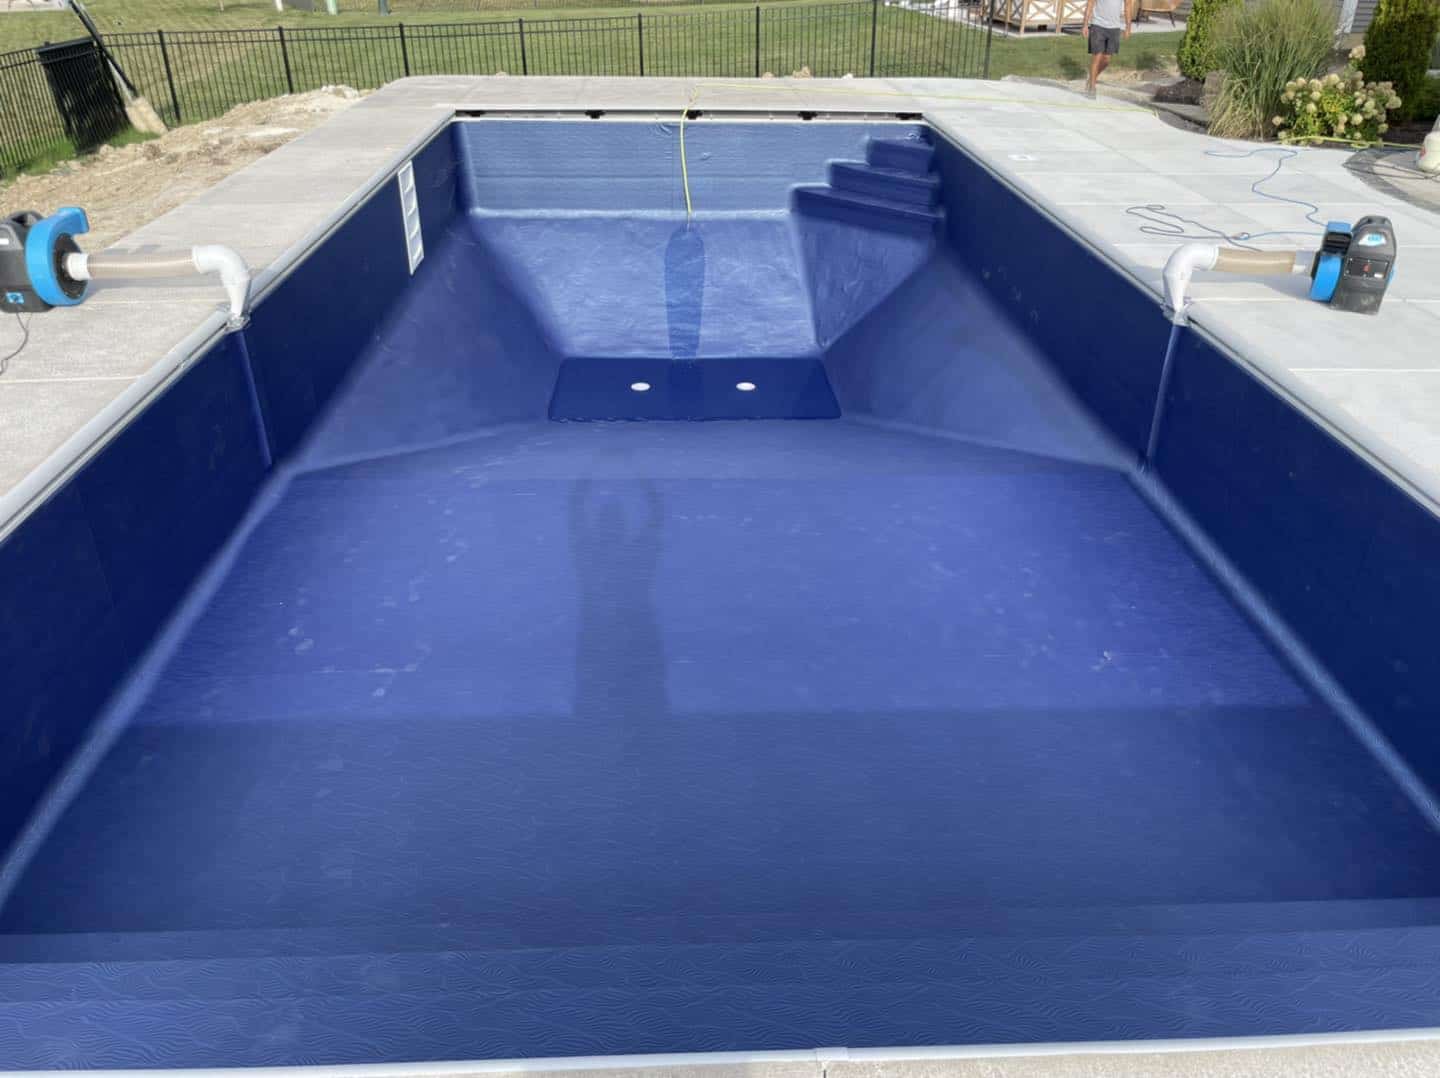 A blue swimming pool with a blue liner.